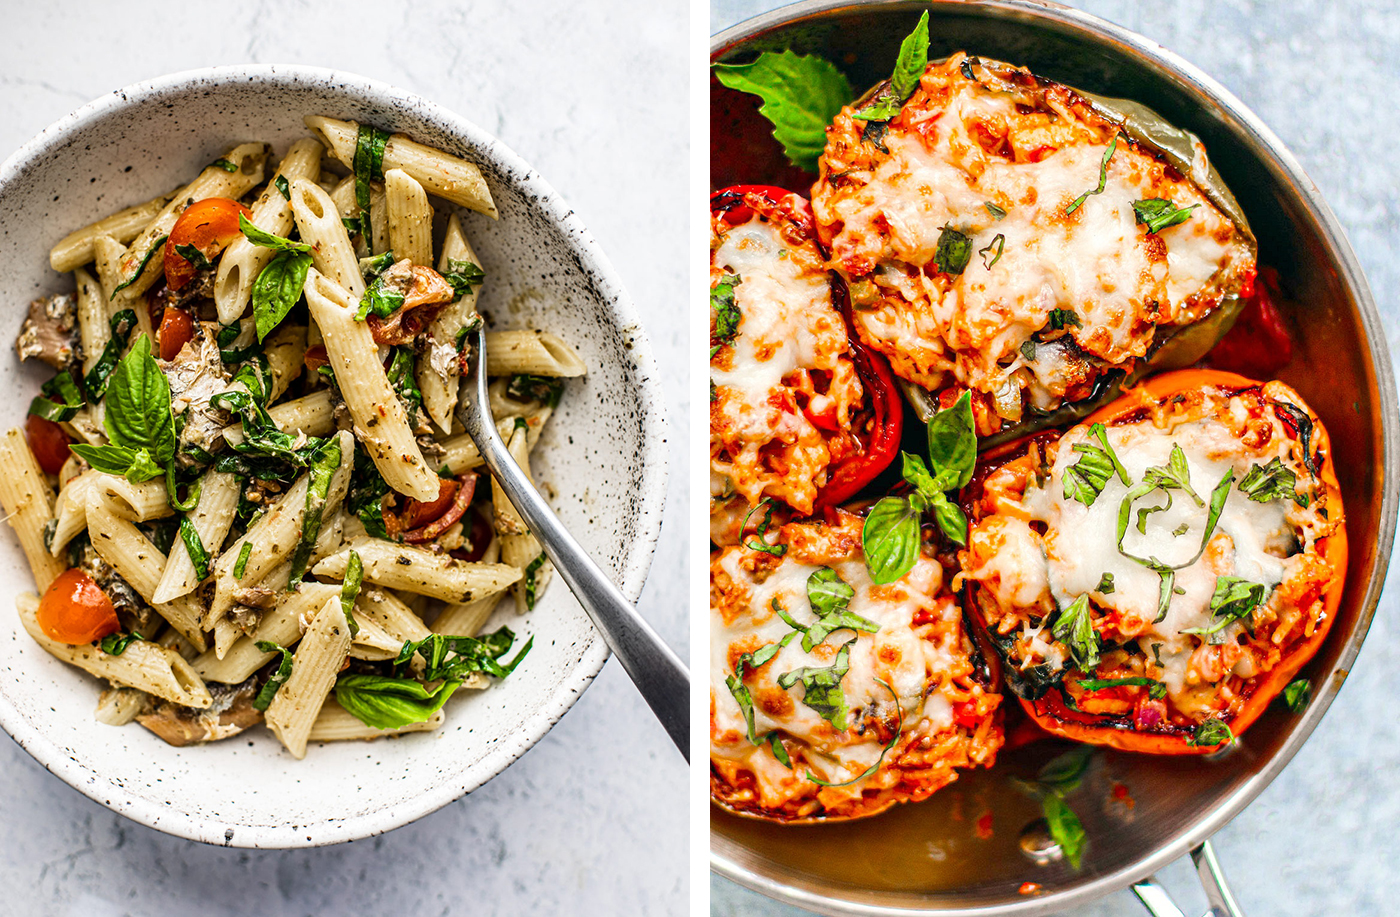 Photo of bowl of pesto pasta with sardines, and photo of stuffed seafood peppers.